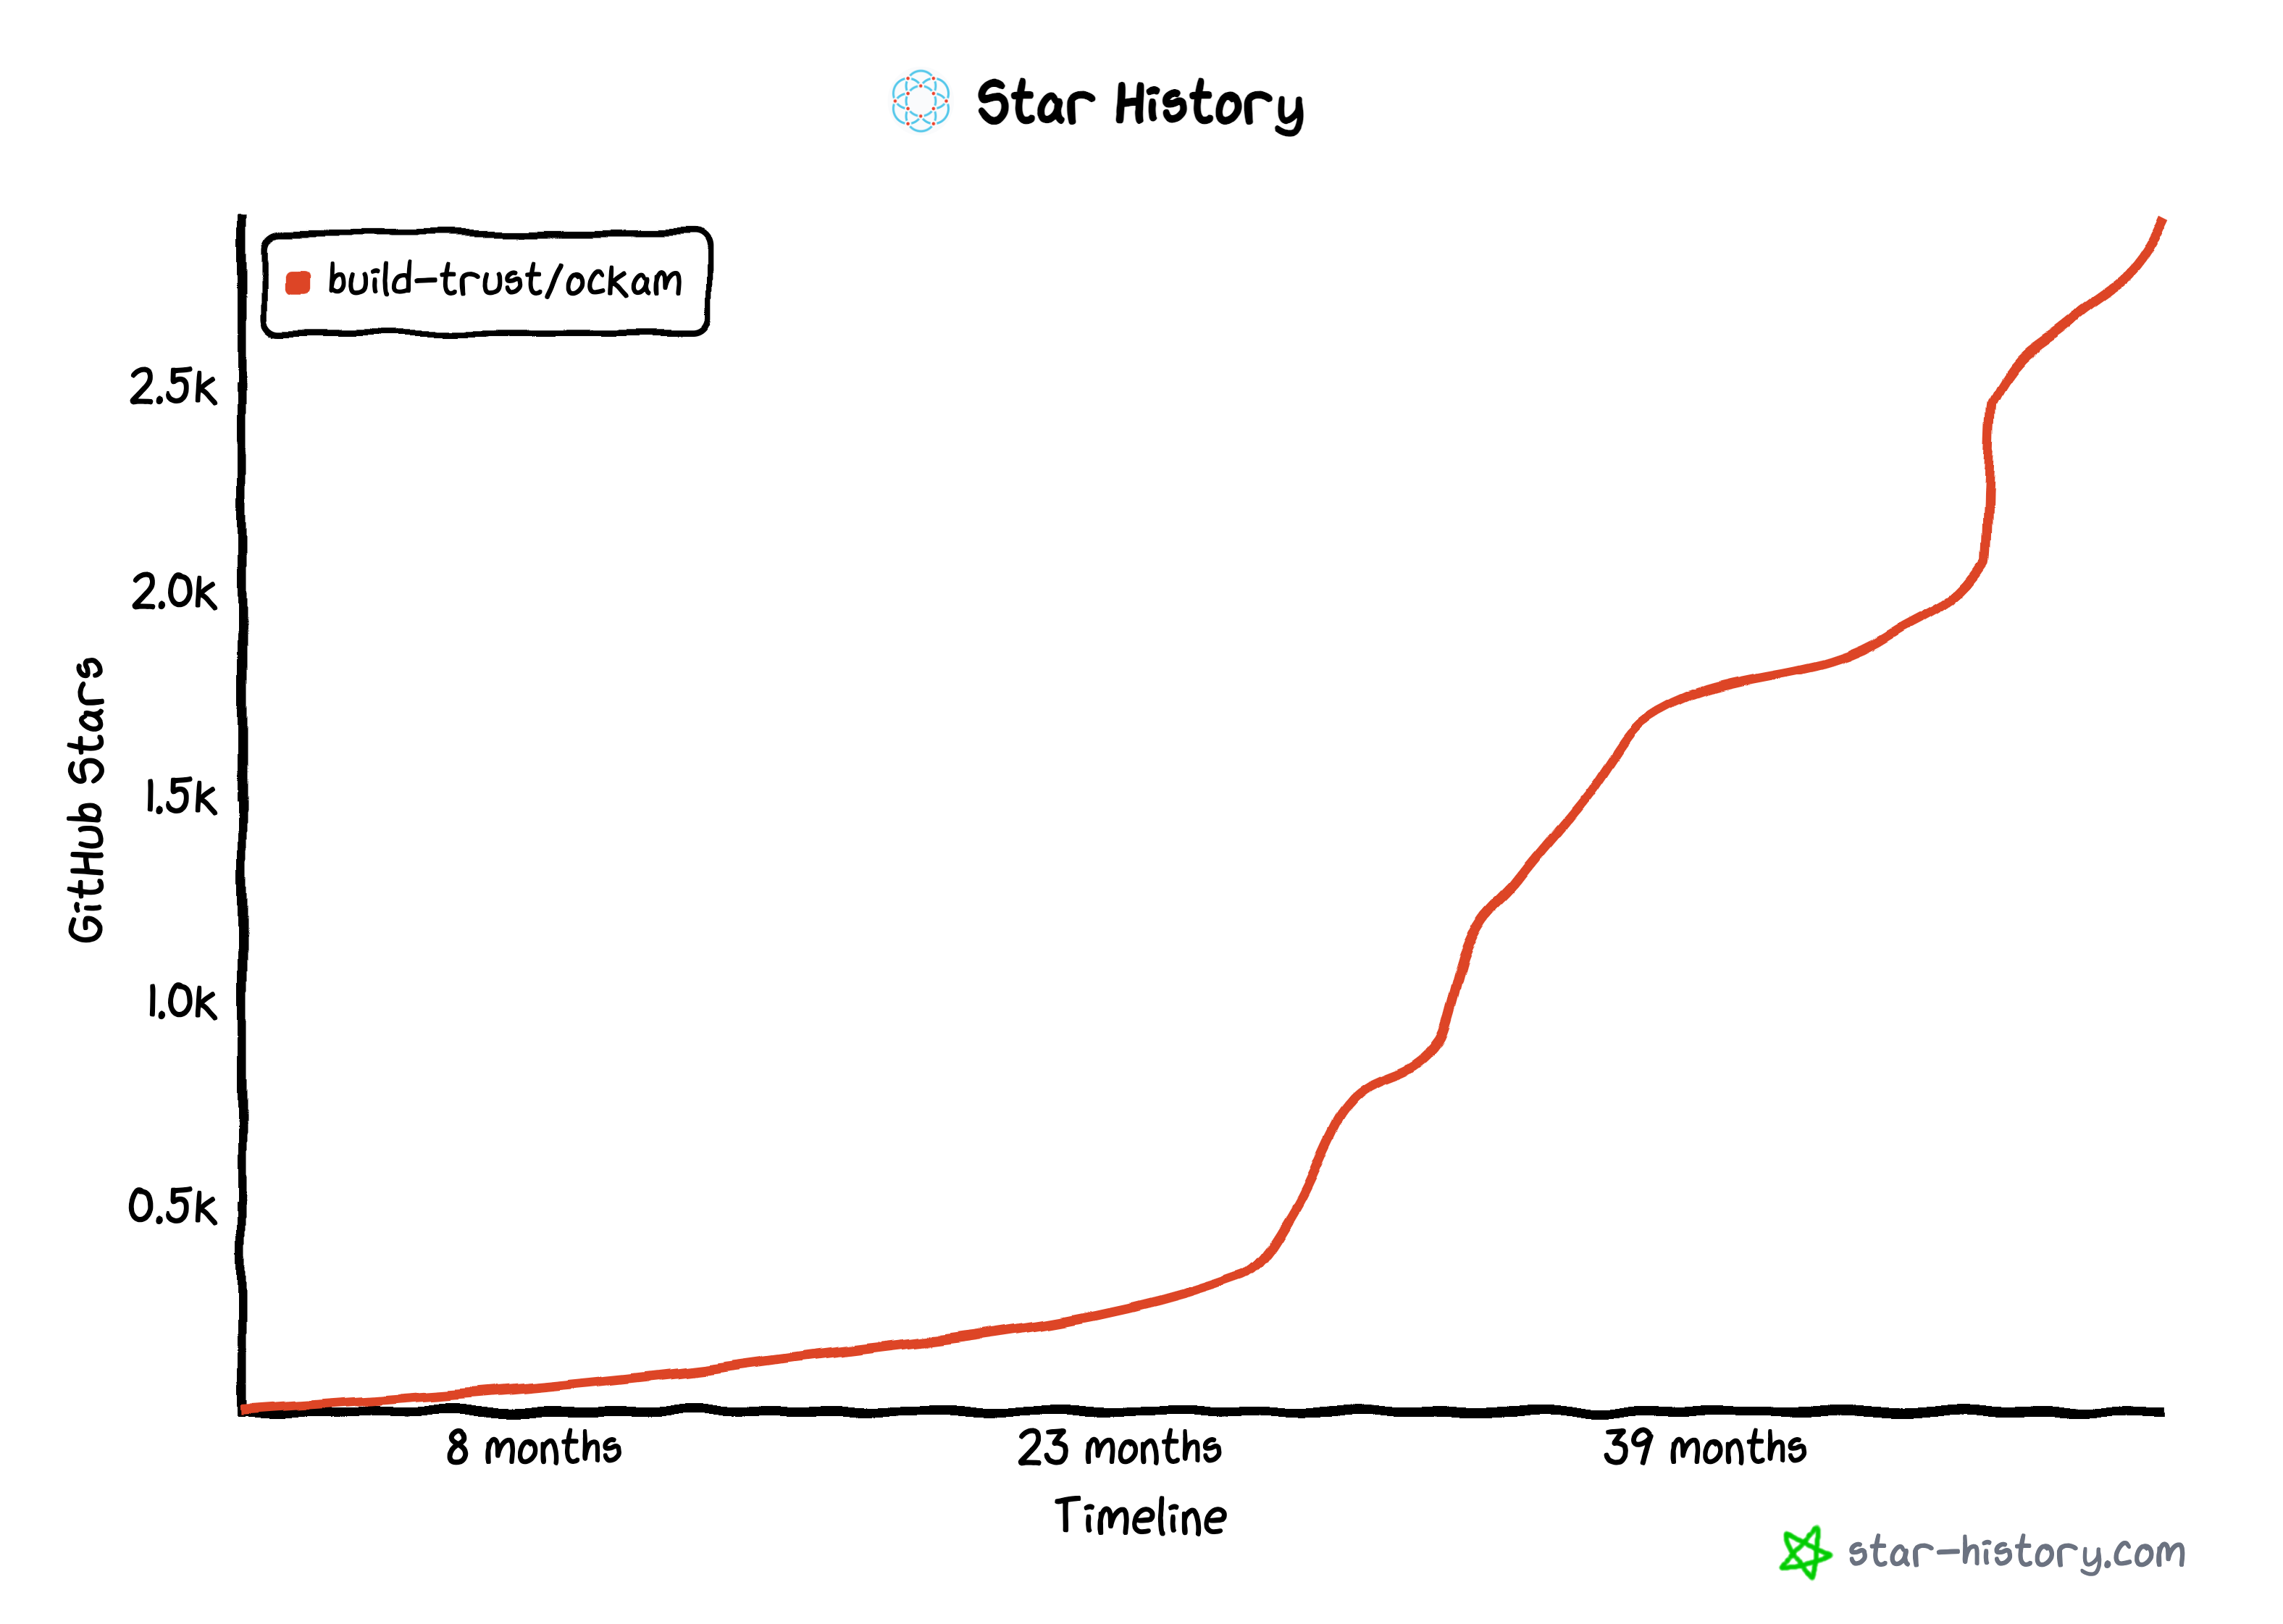 Ockam project GitHub star growth over the past 40 months